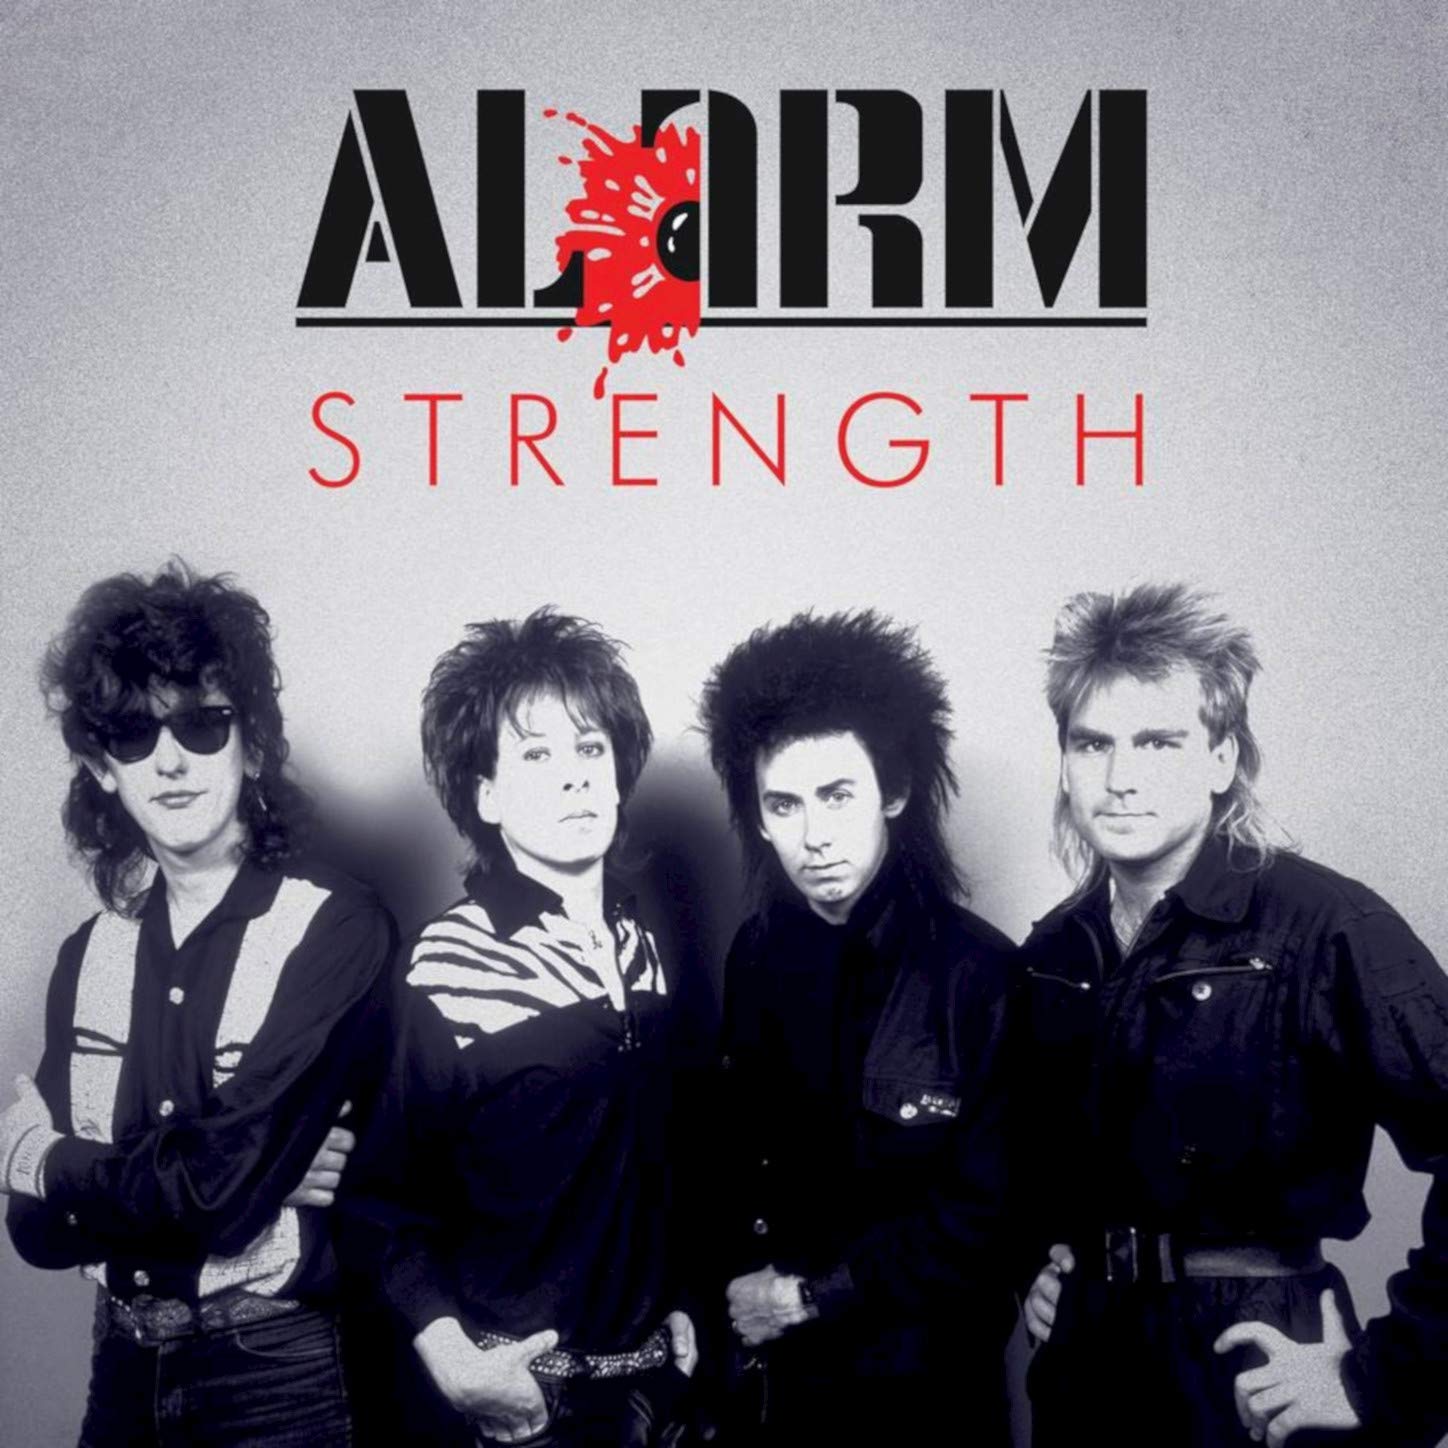 The Alarm-Strength 1985-1986-(21C105CD)-REMASTERED DELUXE EDITION-2CD-FLAC-2019-WRE Download